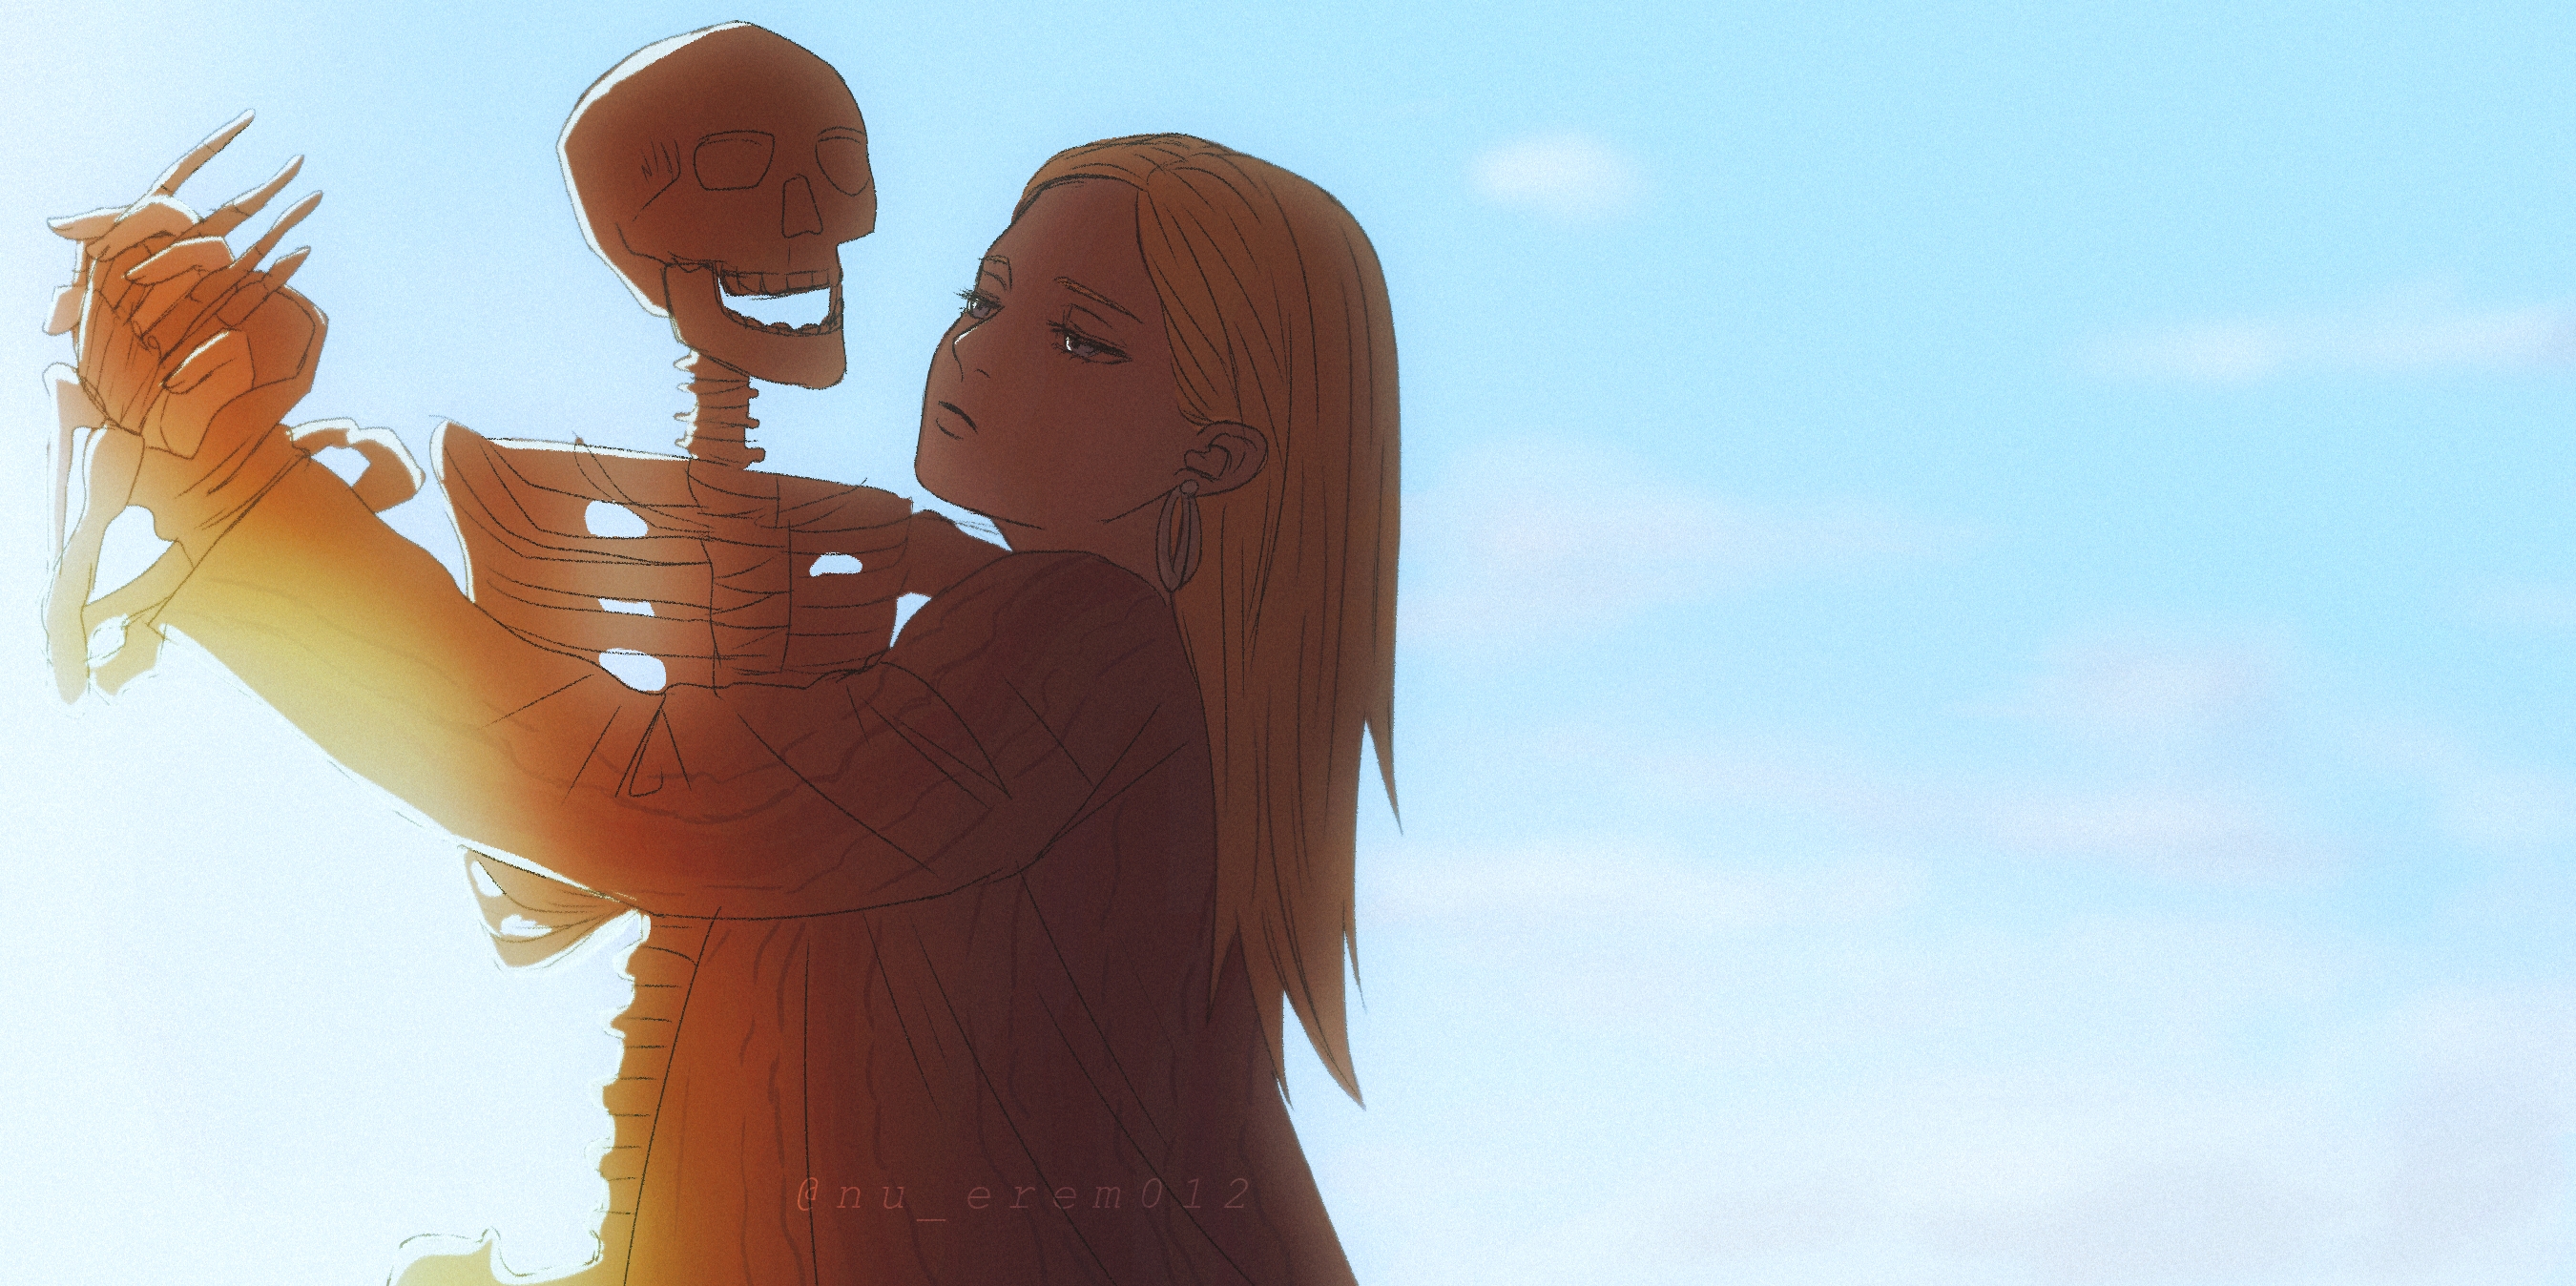 Anime Attack On Titan HD Wallpaper by にゅーとん